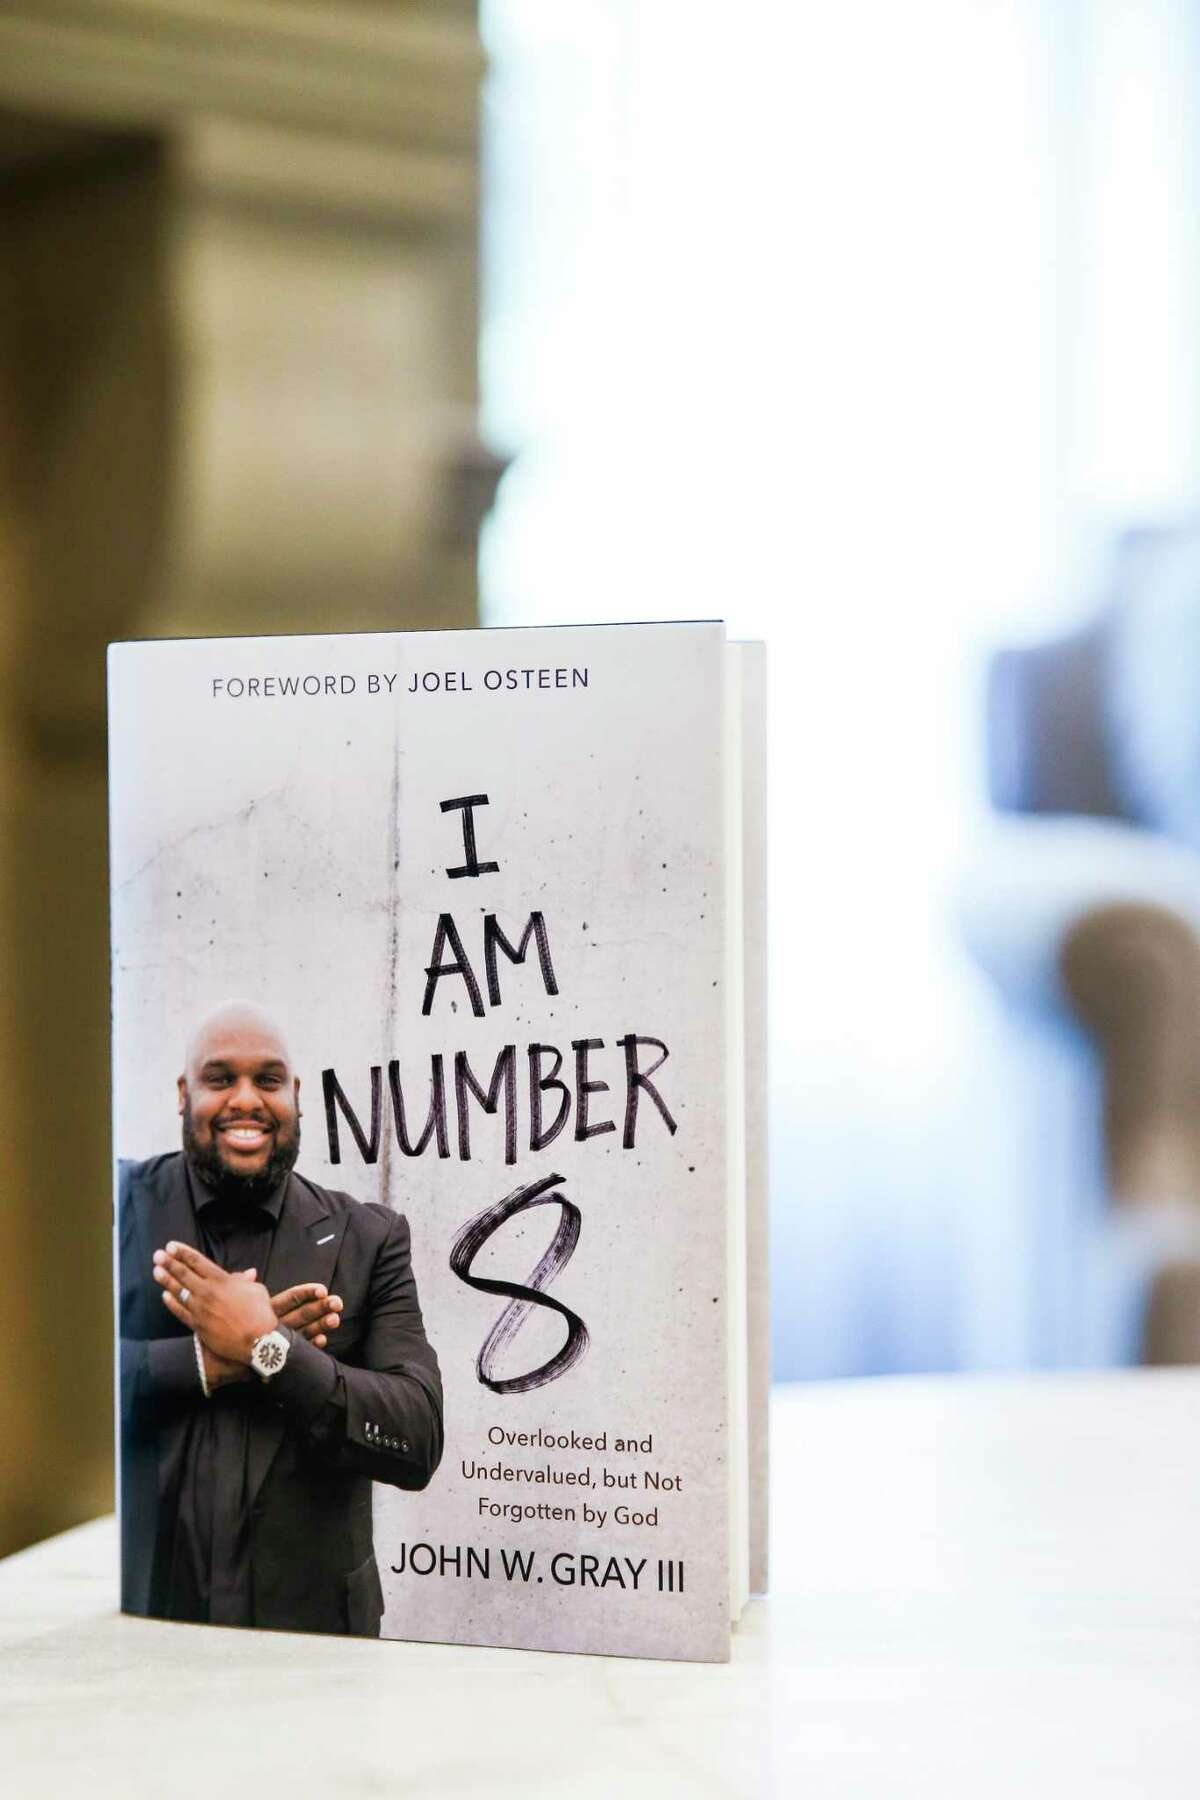 Associate pastor at Lakewood Church John Gray and his wife, Aventer, are the focus of a reality television series on Oprah Winfrey's OWN network.